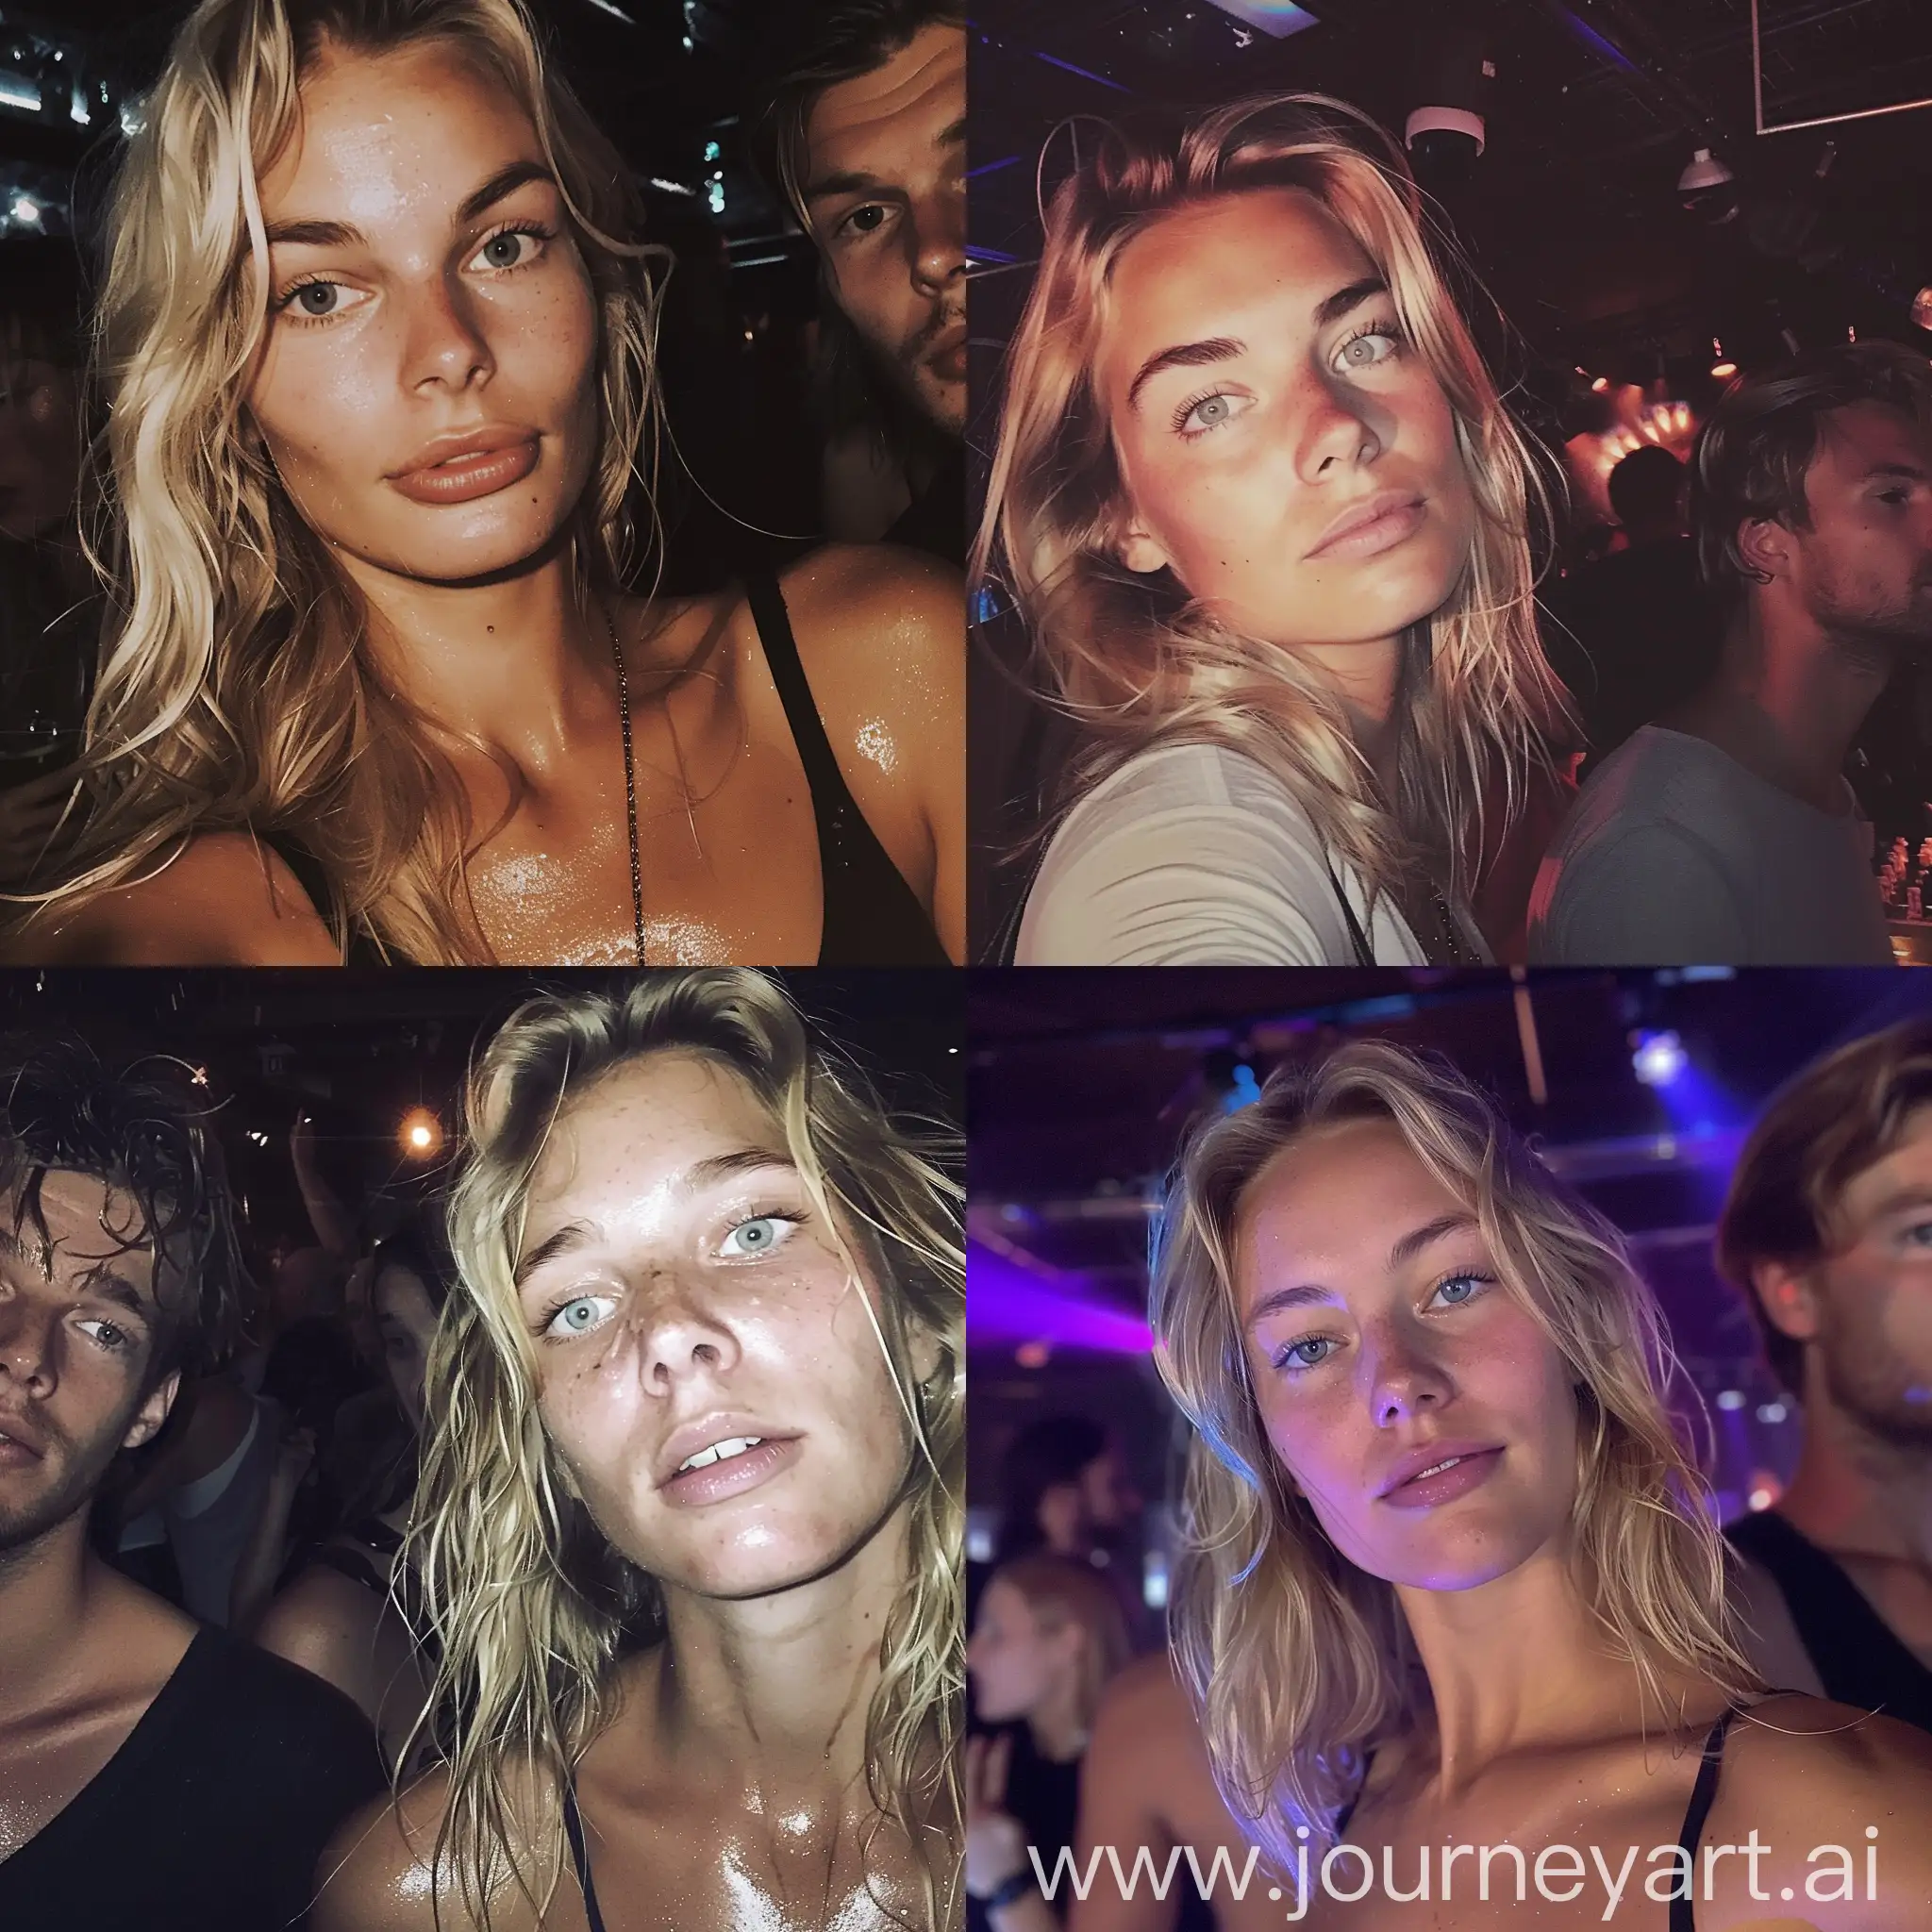 Aesthetic instagram selfie of a danish blonde woman in a party club, the woman is beautiful and looks typically danish, both are looking at the camera, sweaty and flirty --v 6 --ar 1:1